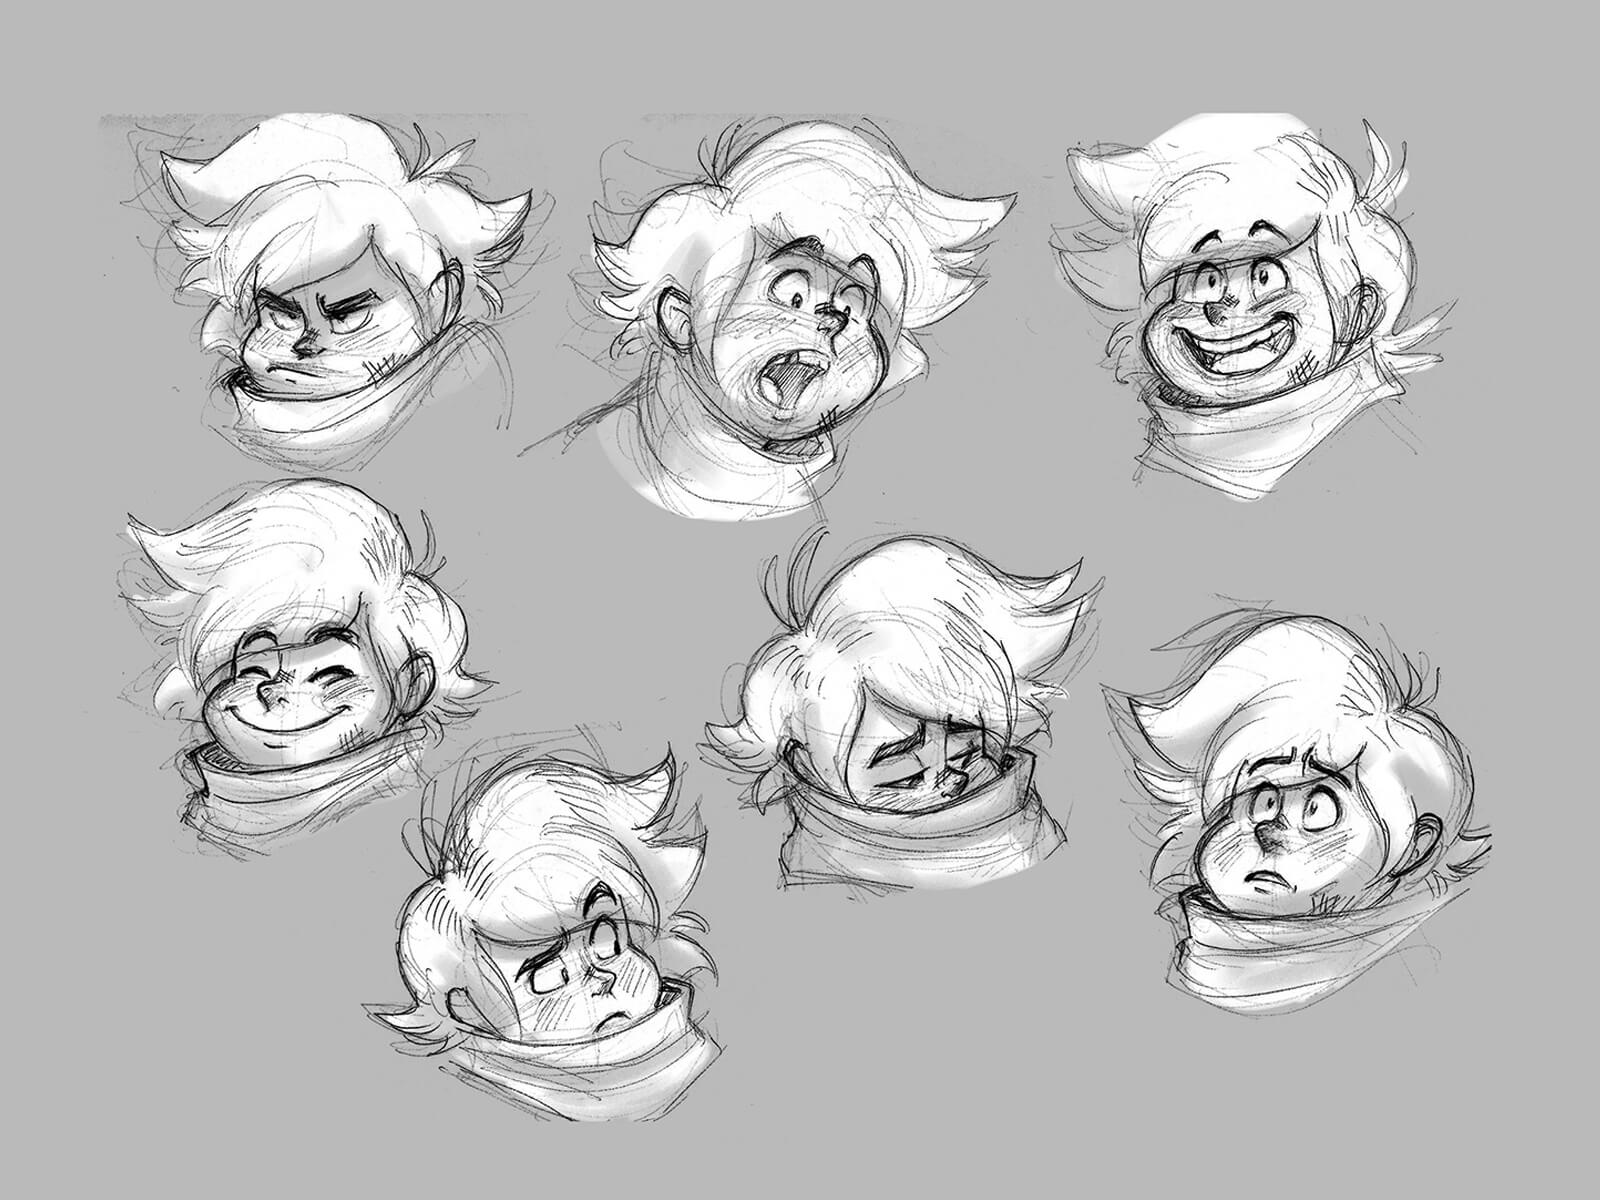 Various facial expressions of a turtlenecked character with wild hair